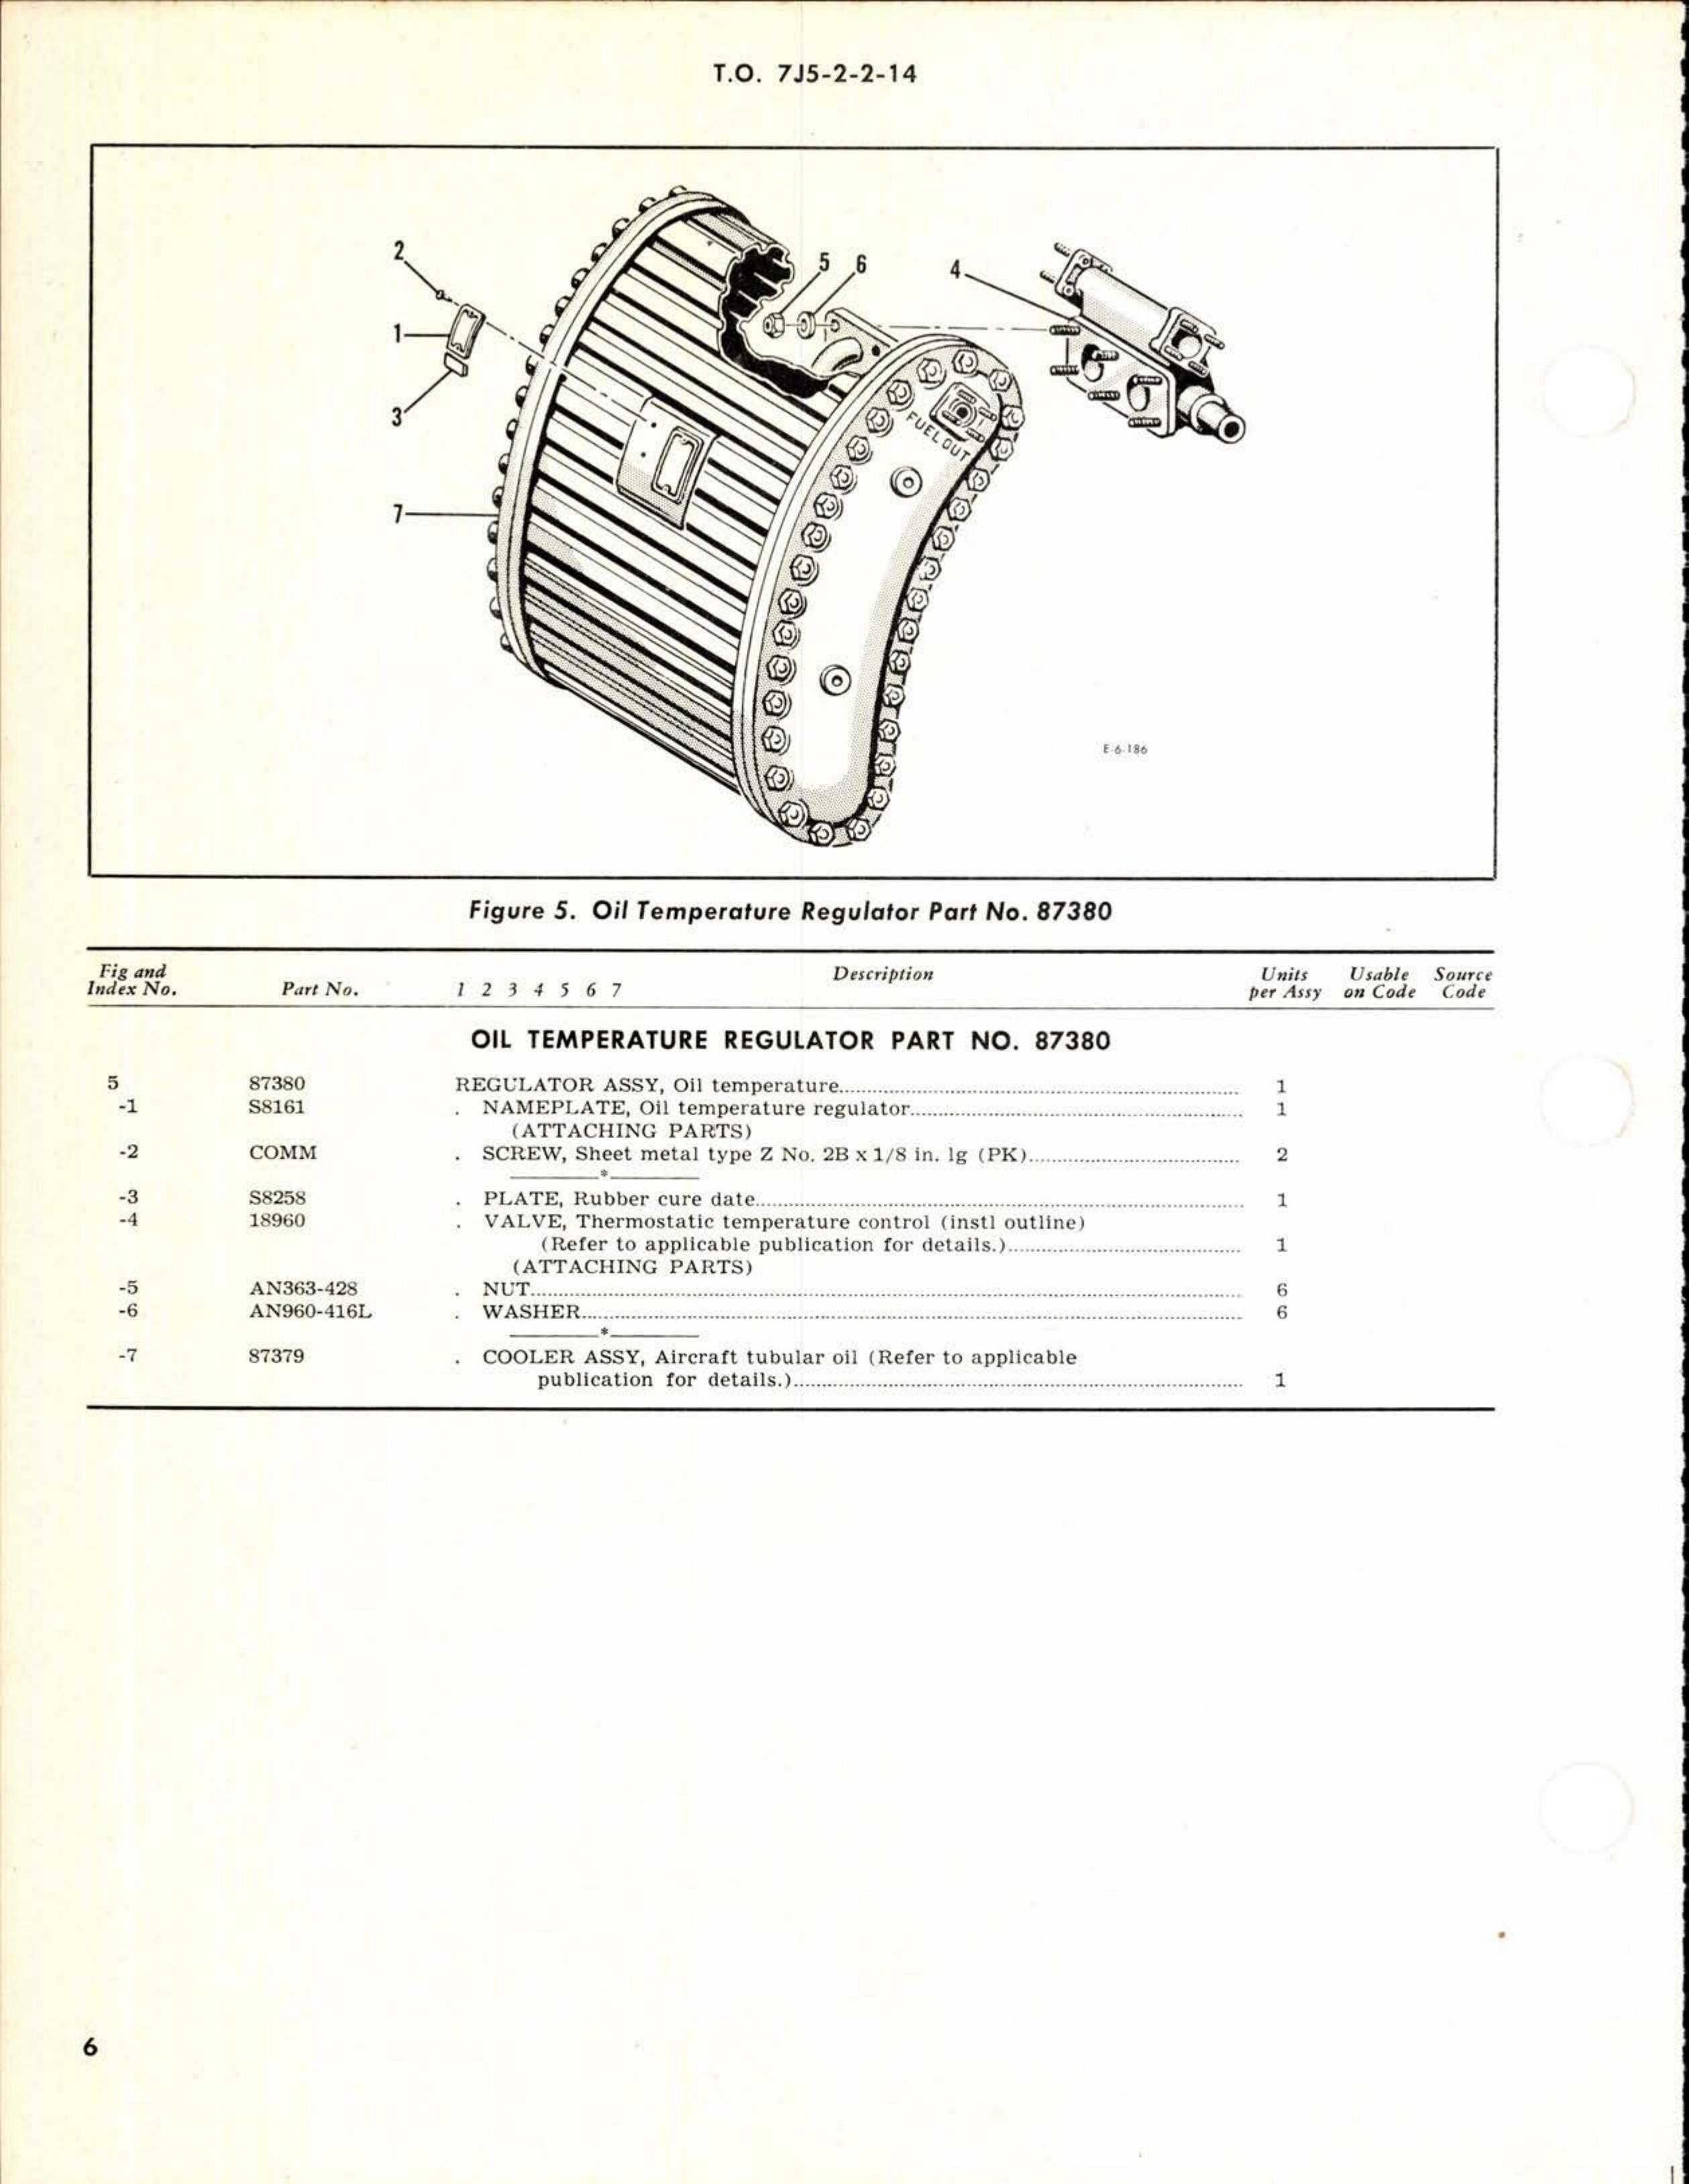 Sample page 6 from AirCorps Library document: Illustrated Parts Breakdown for Oil Temperature Regulators & Heat Exchanger